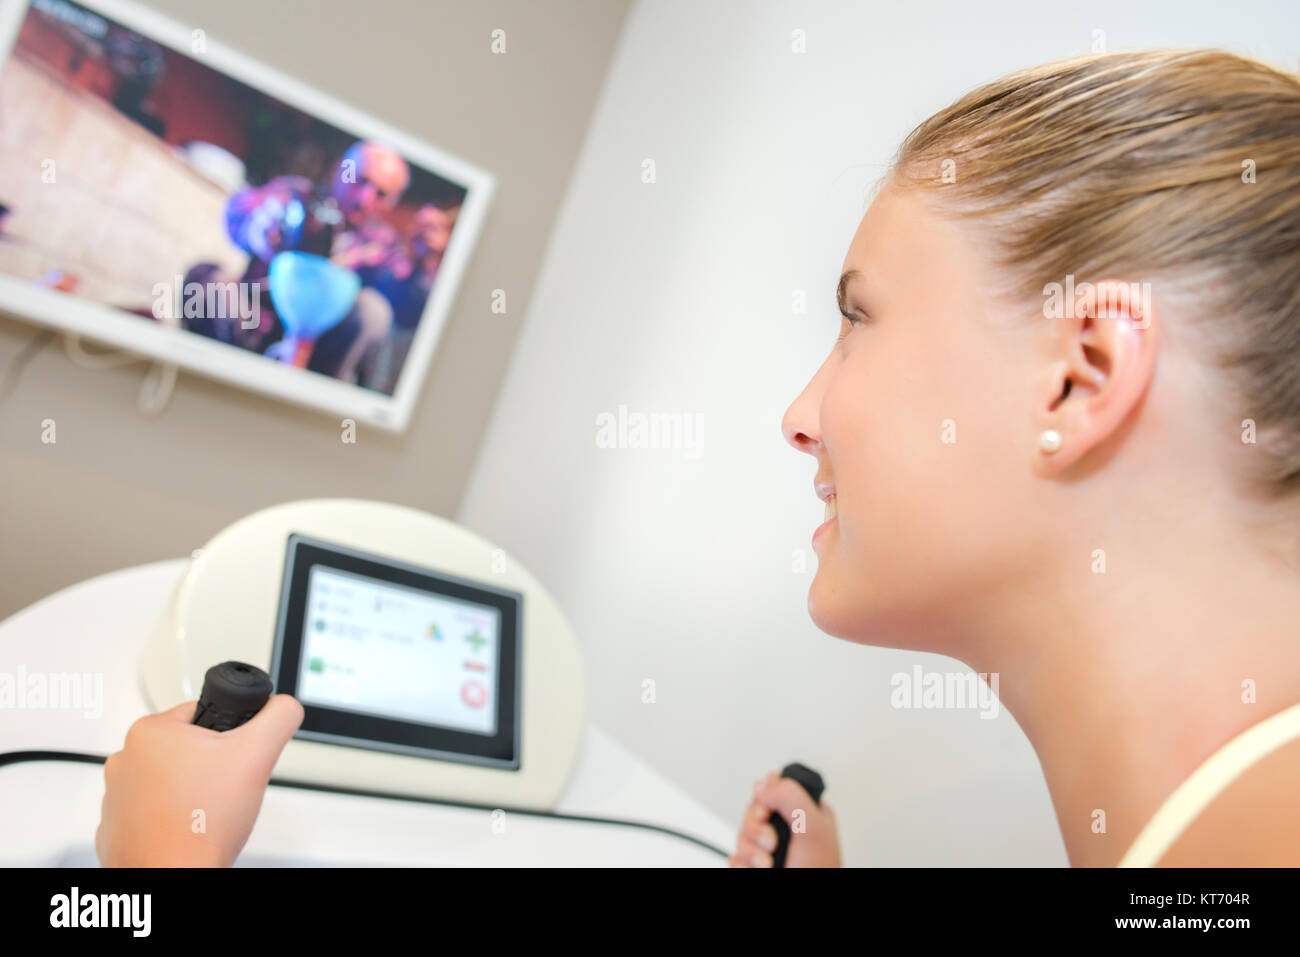 Lady on exercise machine, watching TV screen Stock Photo